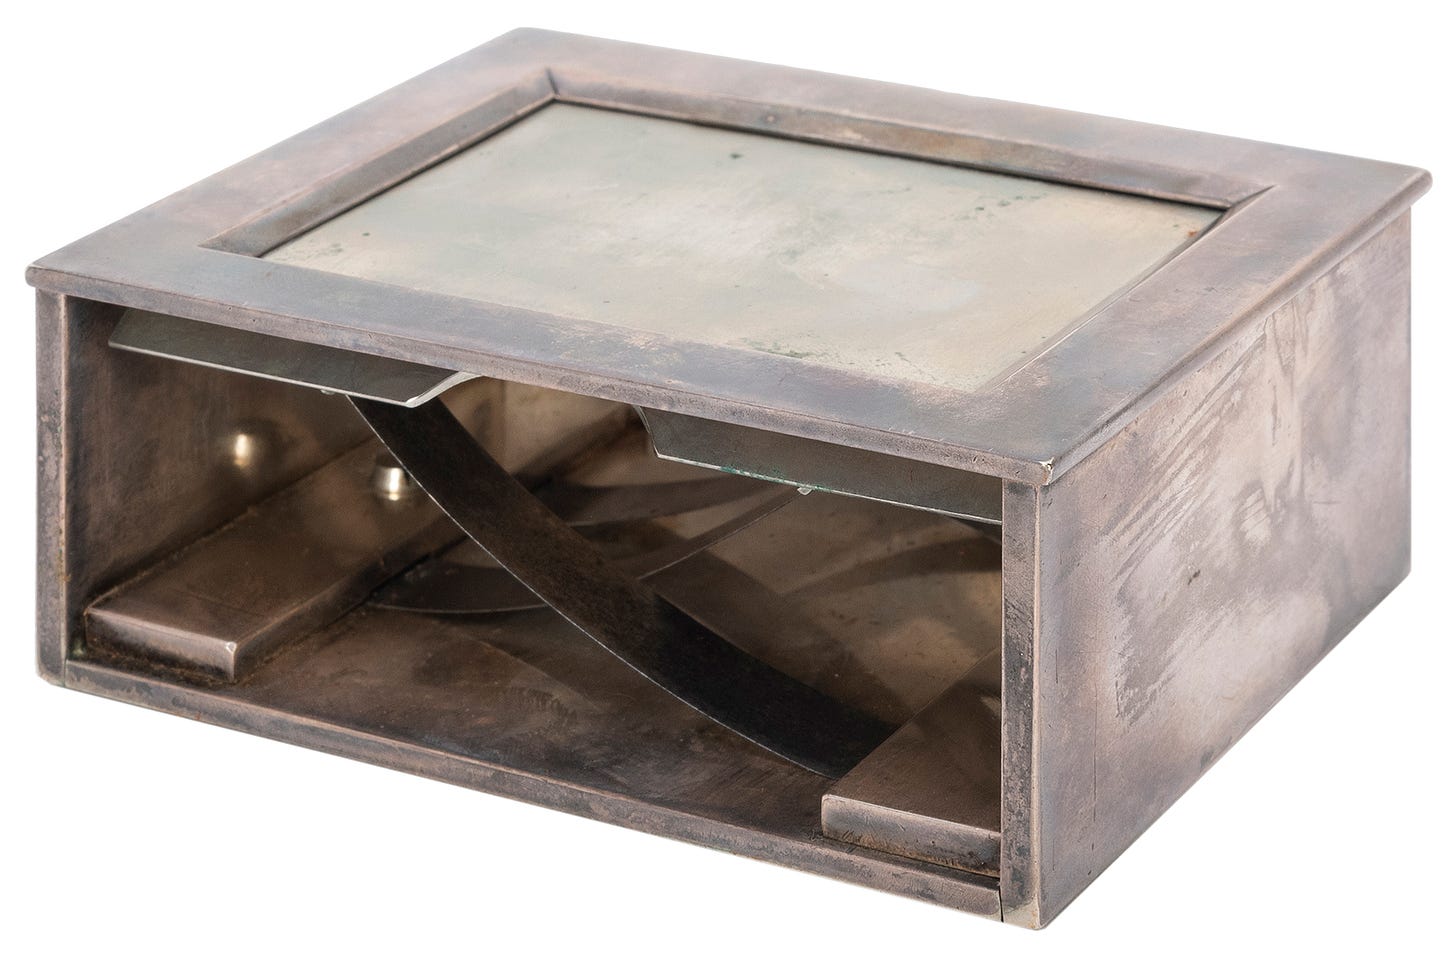 A silver box with one open side, exposing the inner workings of the mechanism.